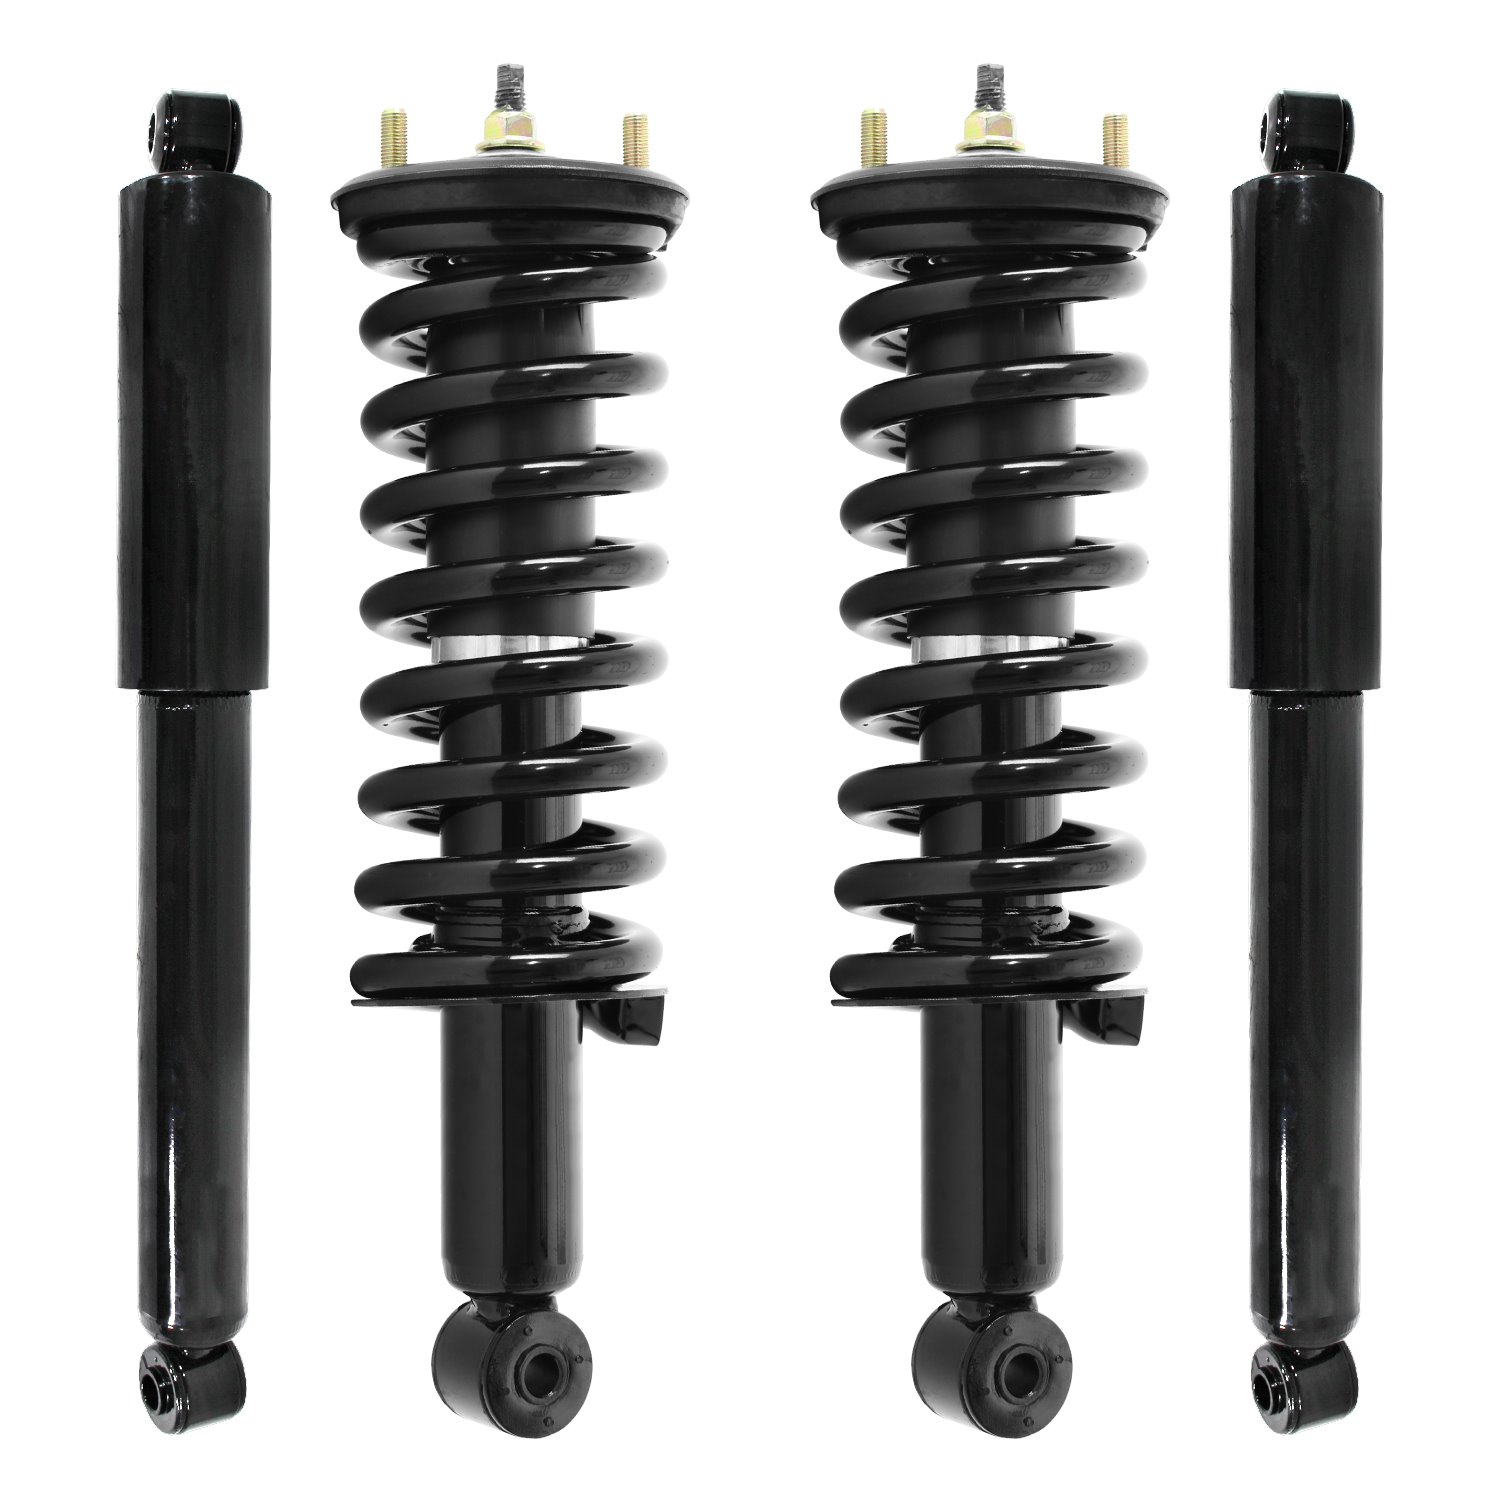 4-11296-255410-001 Front & Rear Suspension Strut & Coil Spring Assembly Fits Select Nissan Frontier